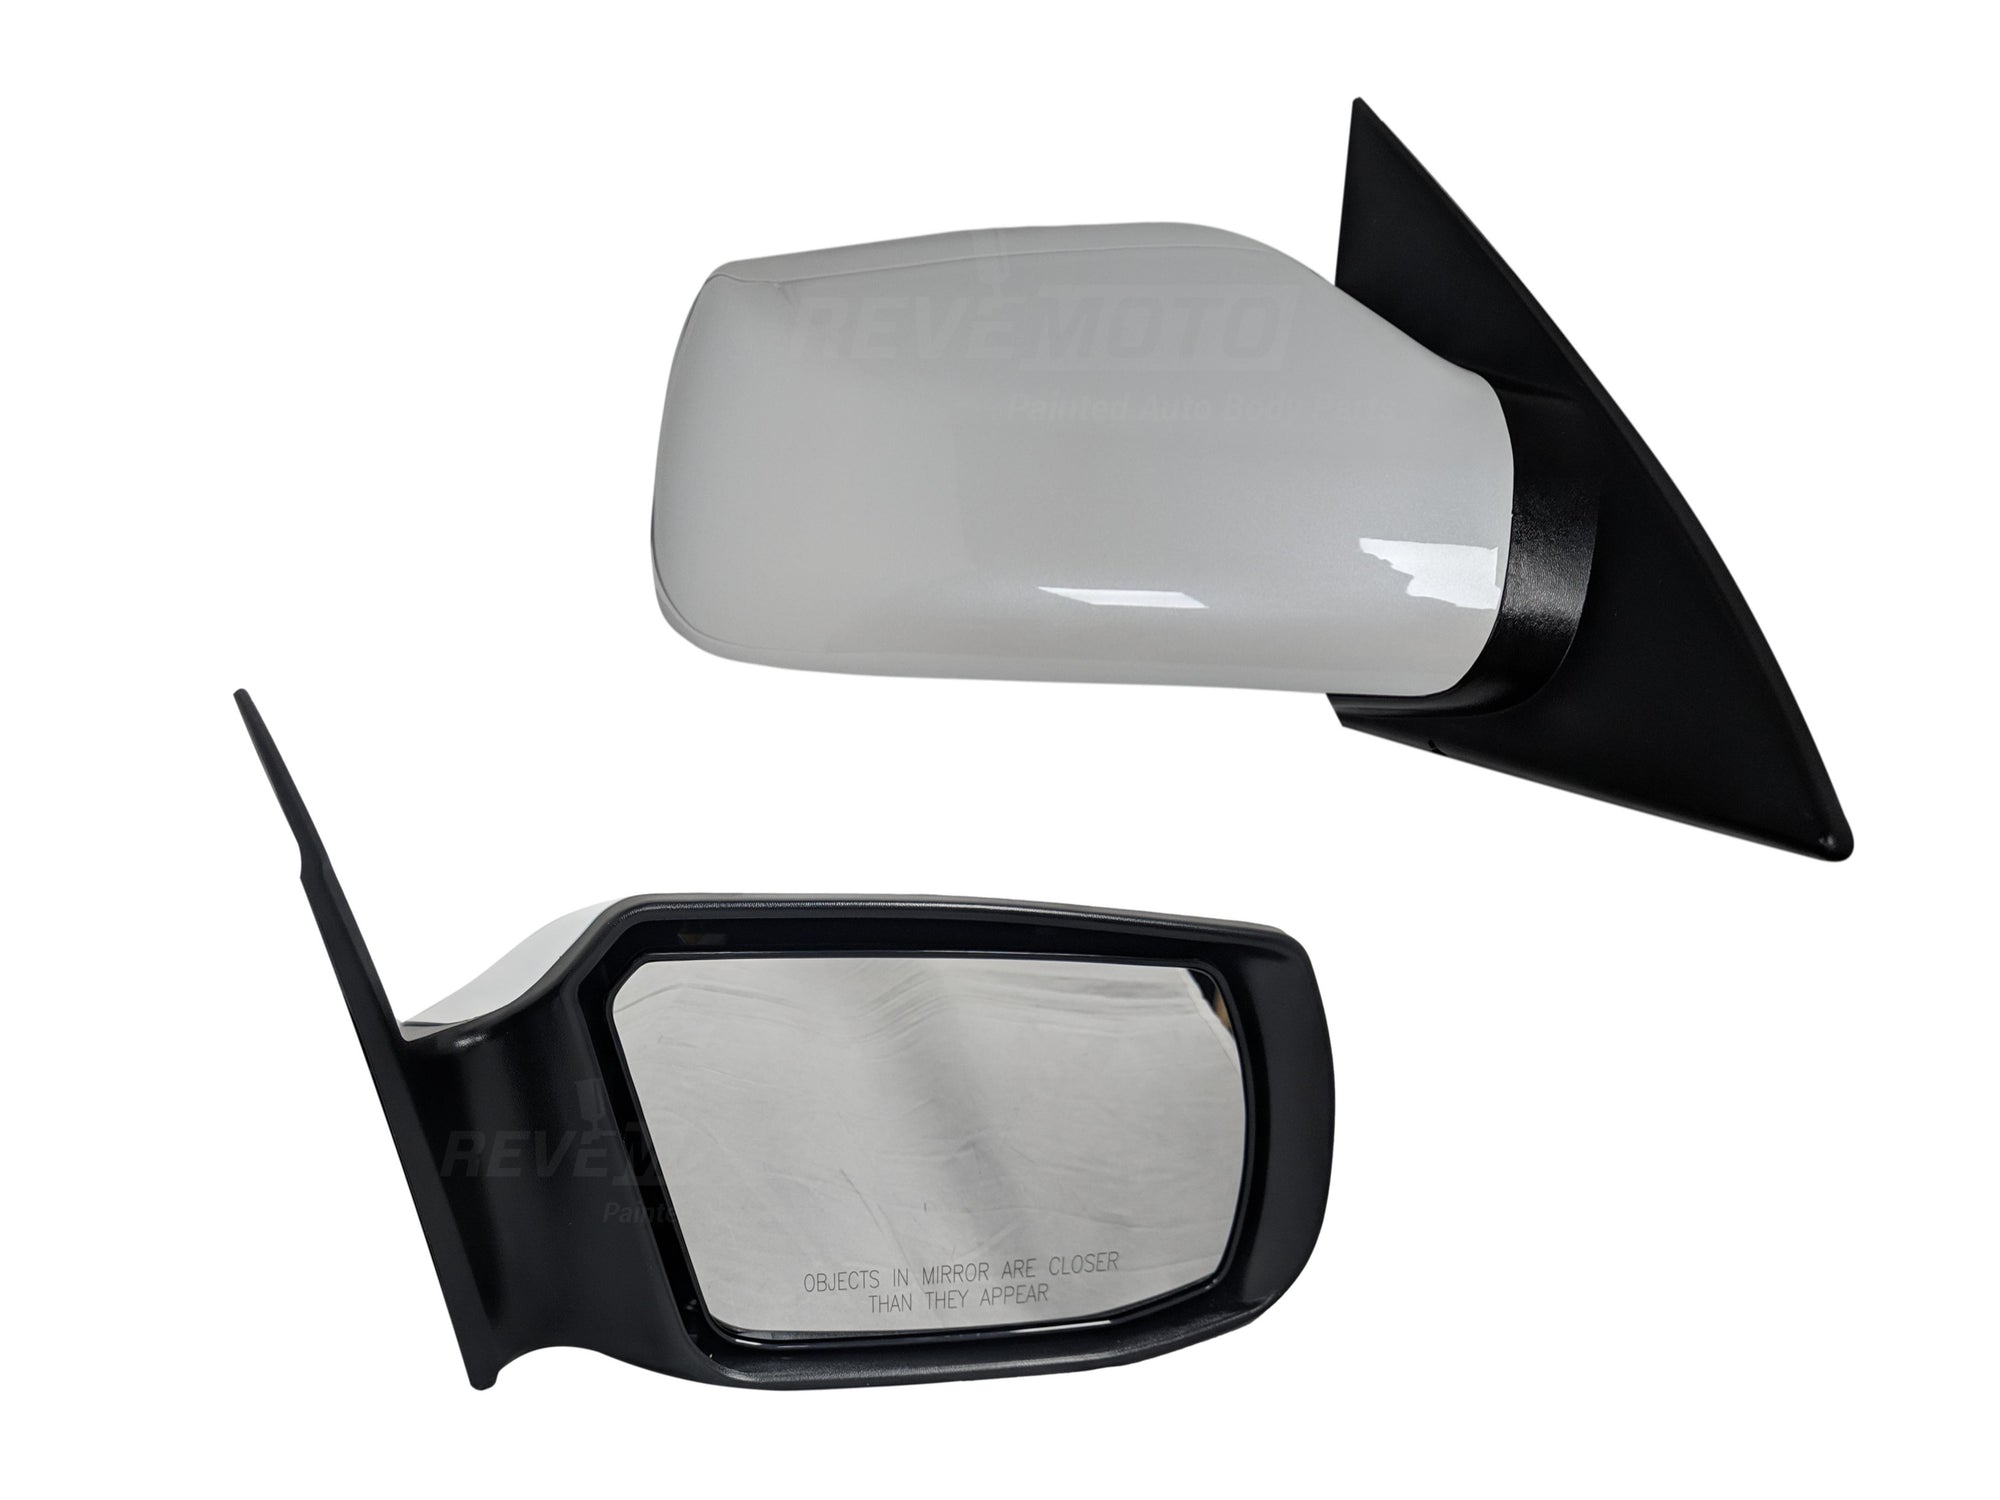 2009 Nissan Altima Passenger Side View Mirror, Without Heated Glass, Without Signal Lamp, 2.5 Liter, Sedan, 4 Door, PaintedSatin White Pearl (QX3) 96301JA04A NI1321163